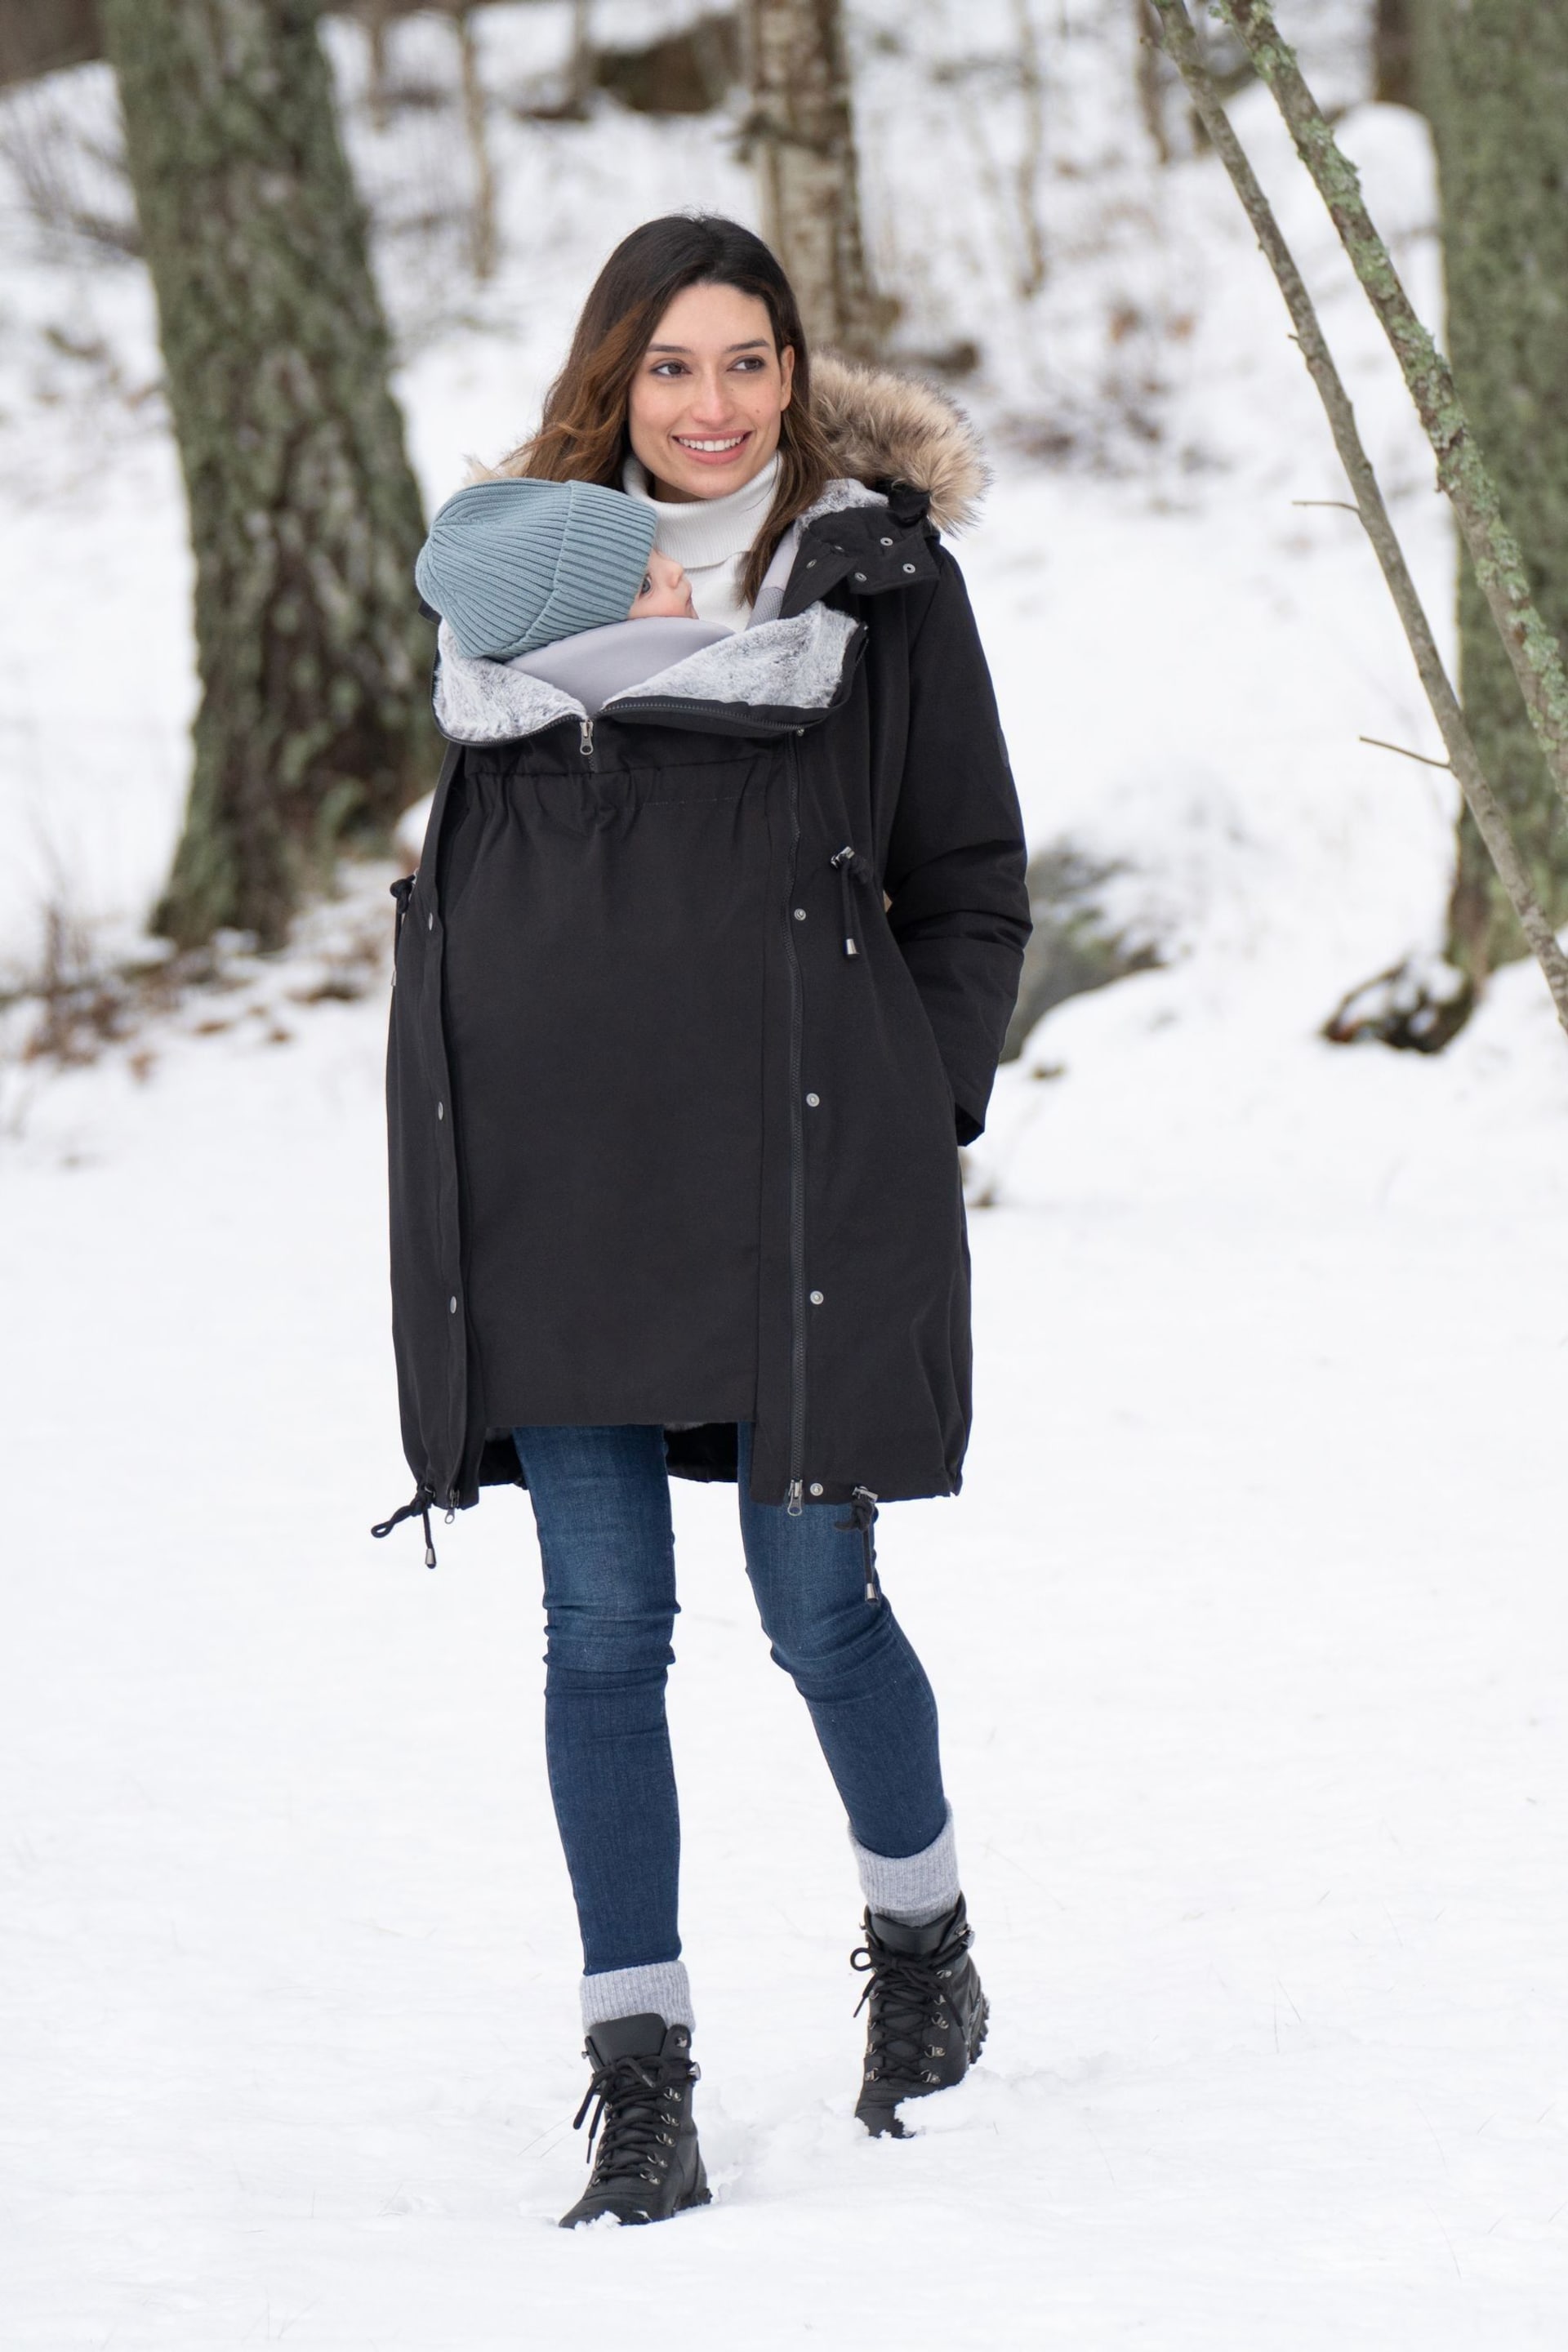 Seraphine Black 3 in 1 Winter Maternity Parka - Image 3 of 6